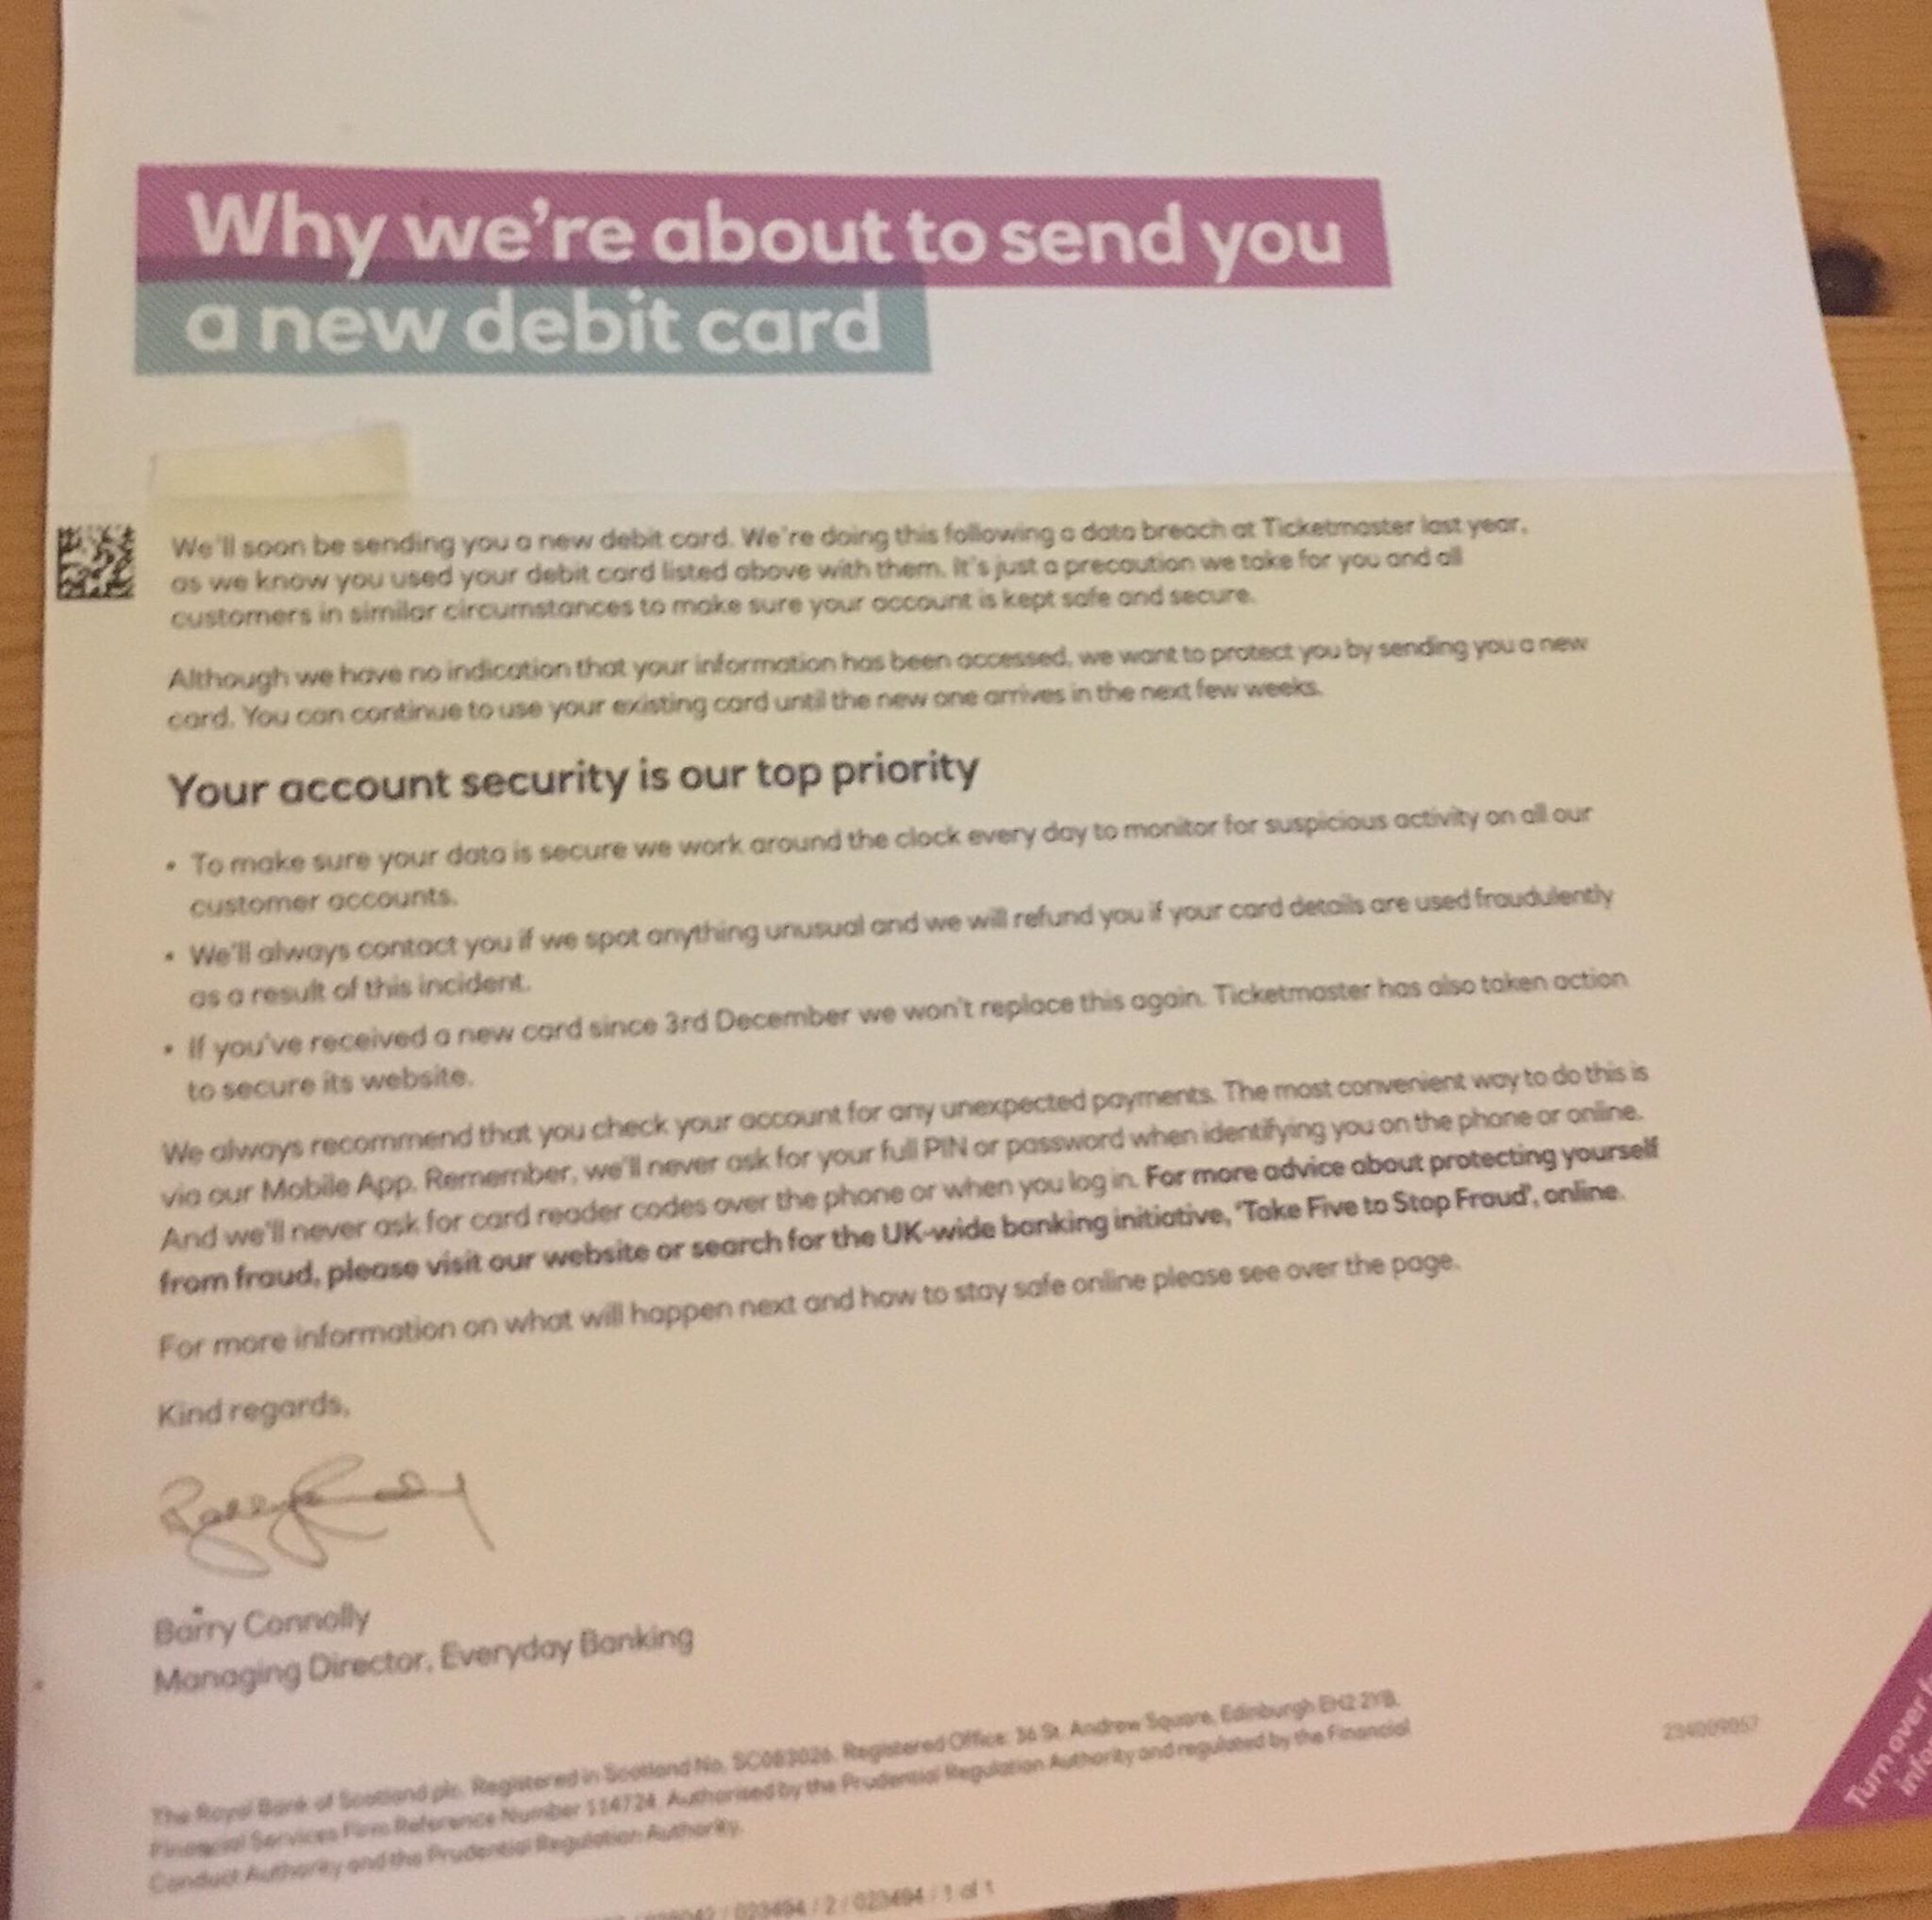 Letter posted to RBS customers about getting a new debit card following a cyber hack on Ticketmaster